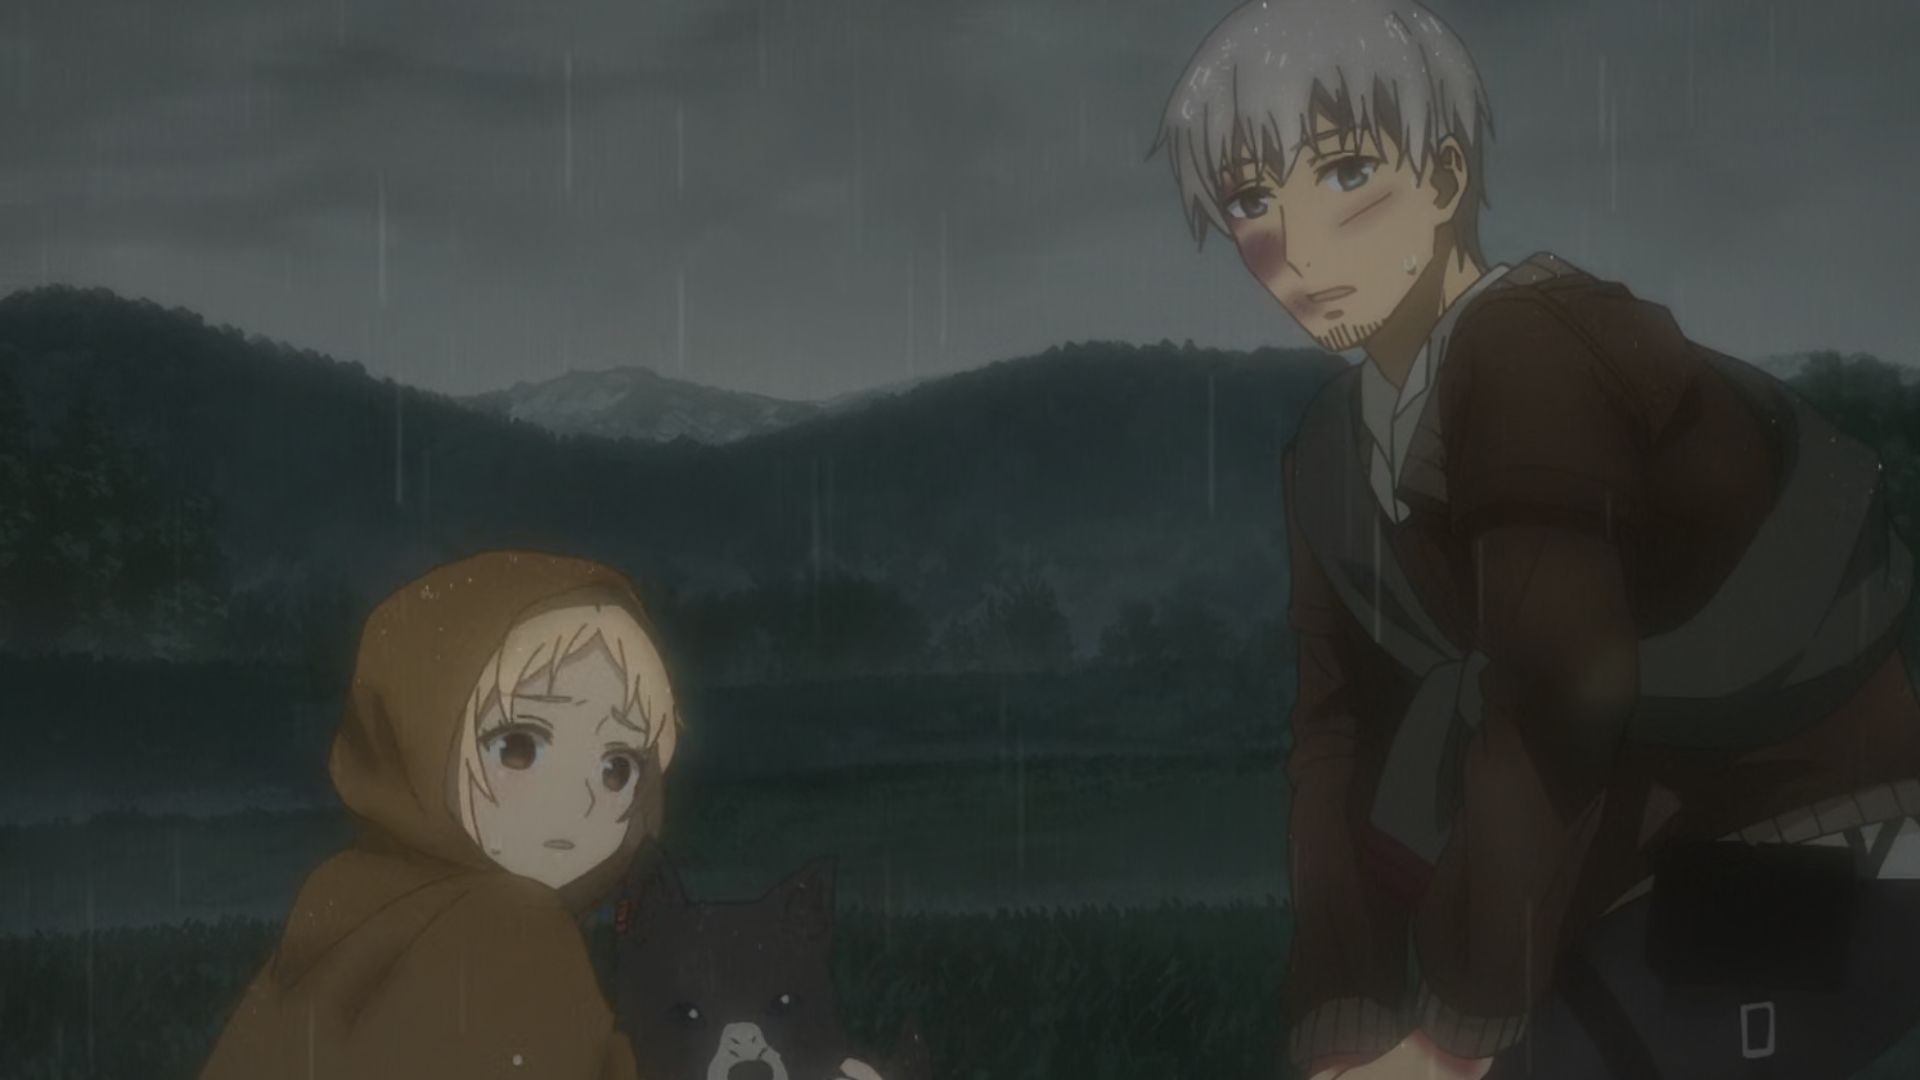 Spice and Wolf Merchant Meets The Wise Wolf Episode 13